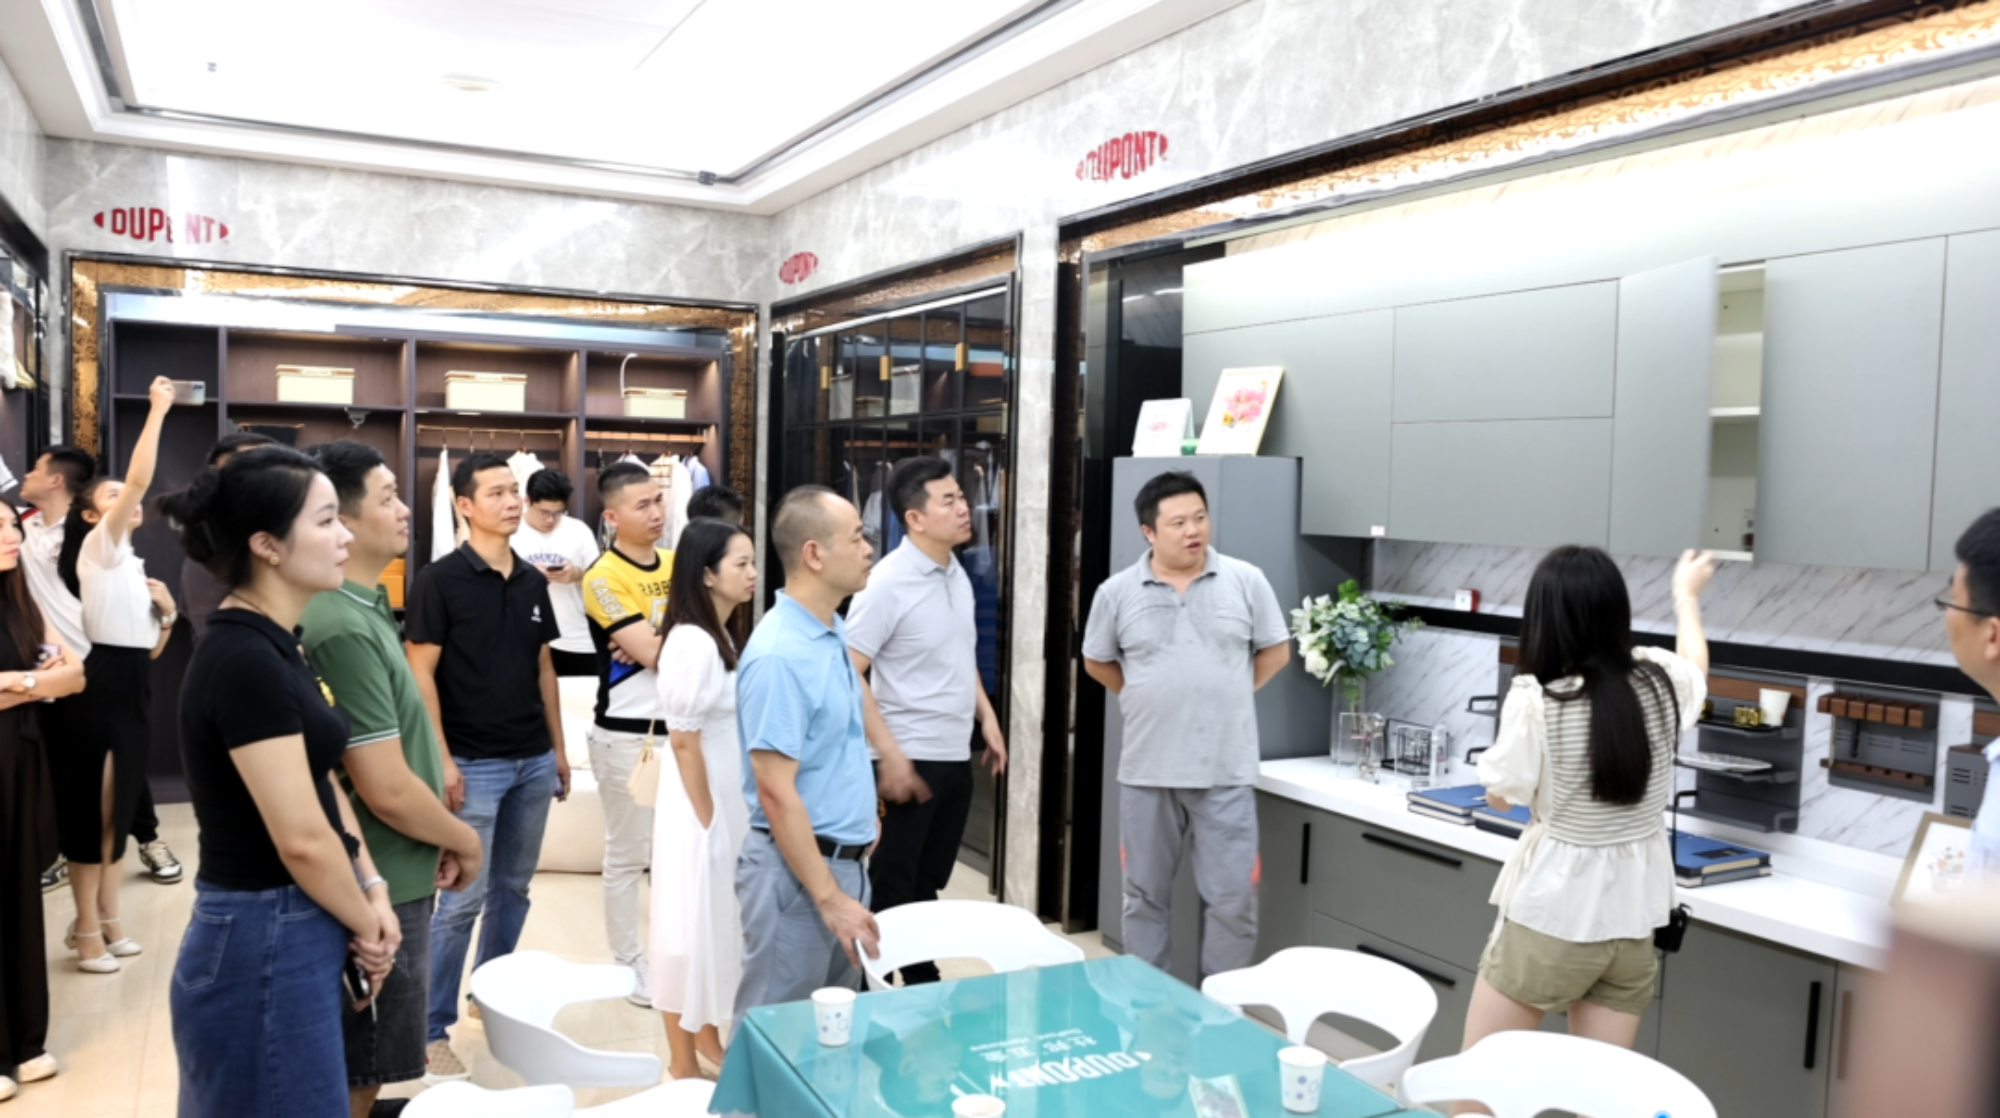 ROEASY Hardware Information | Warmly Welcome the Guangdong Home Building Materials Chamber of Commerce Youth Committee Inspection and Exchange Team to Our Company for Visit and Exchange